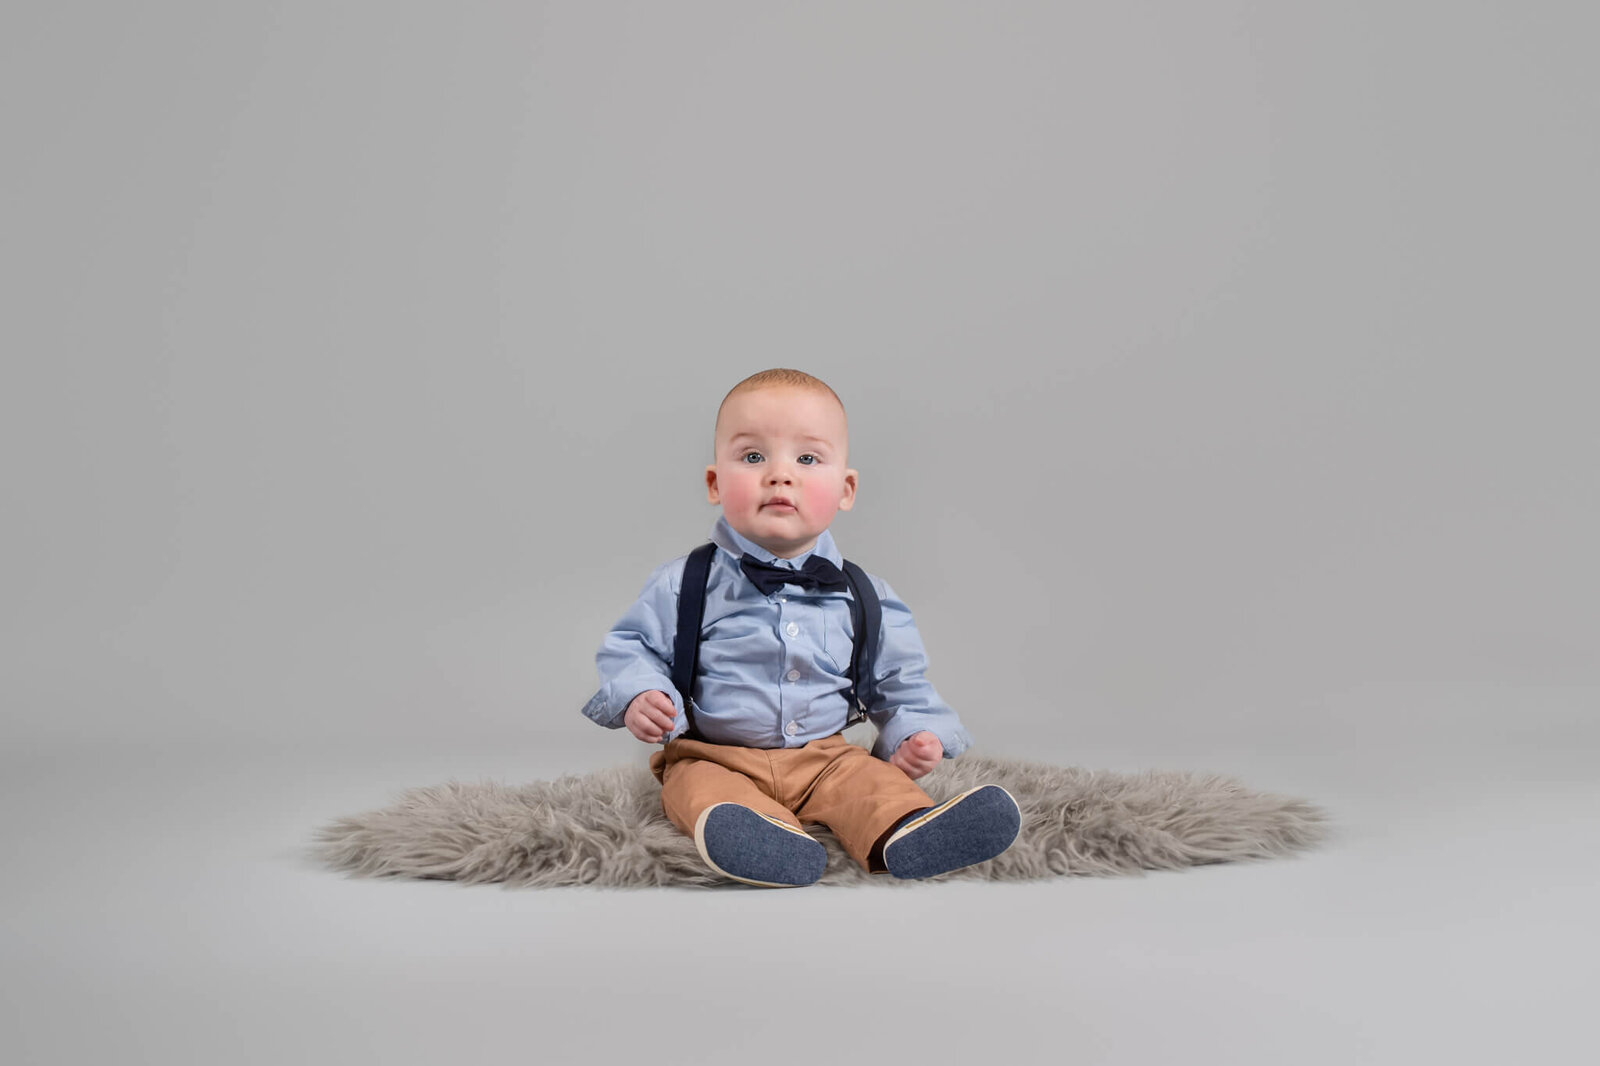 Six month sitter session of little boy on gray background wearing a suit and navy overalls